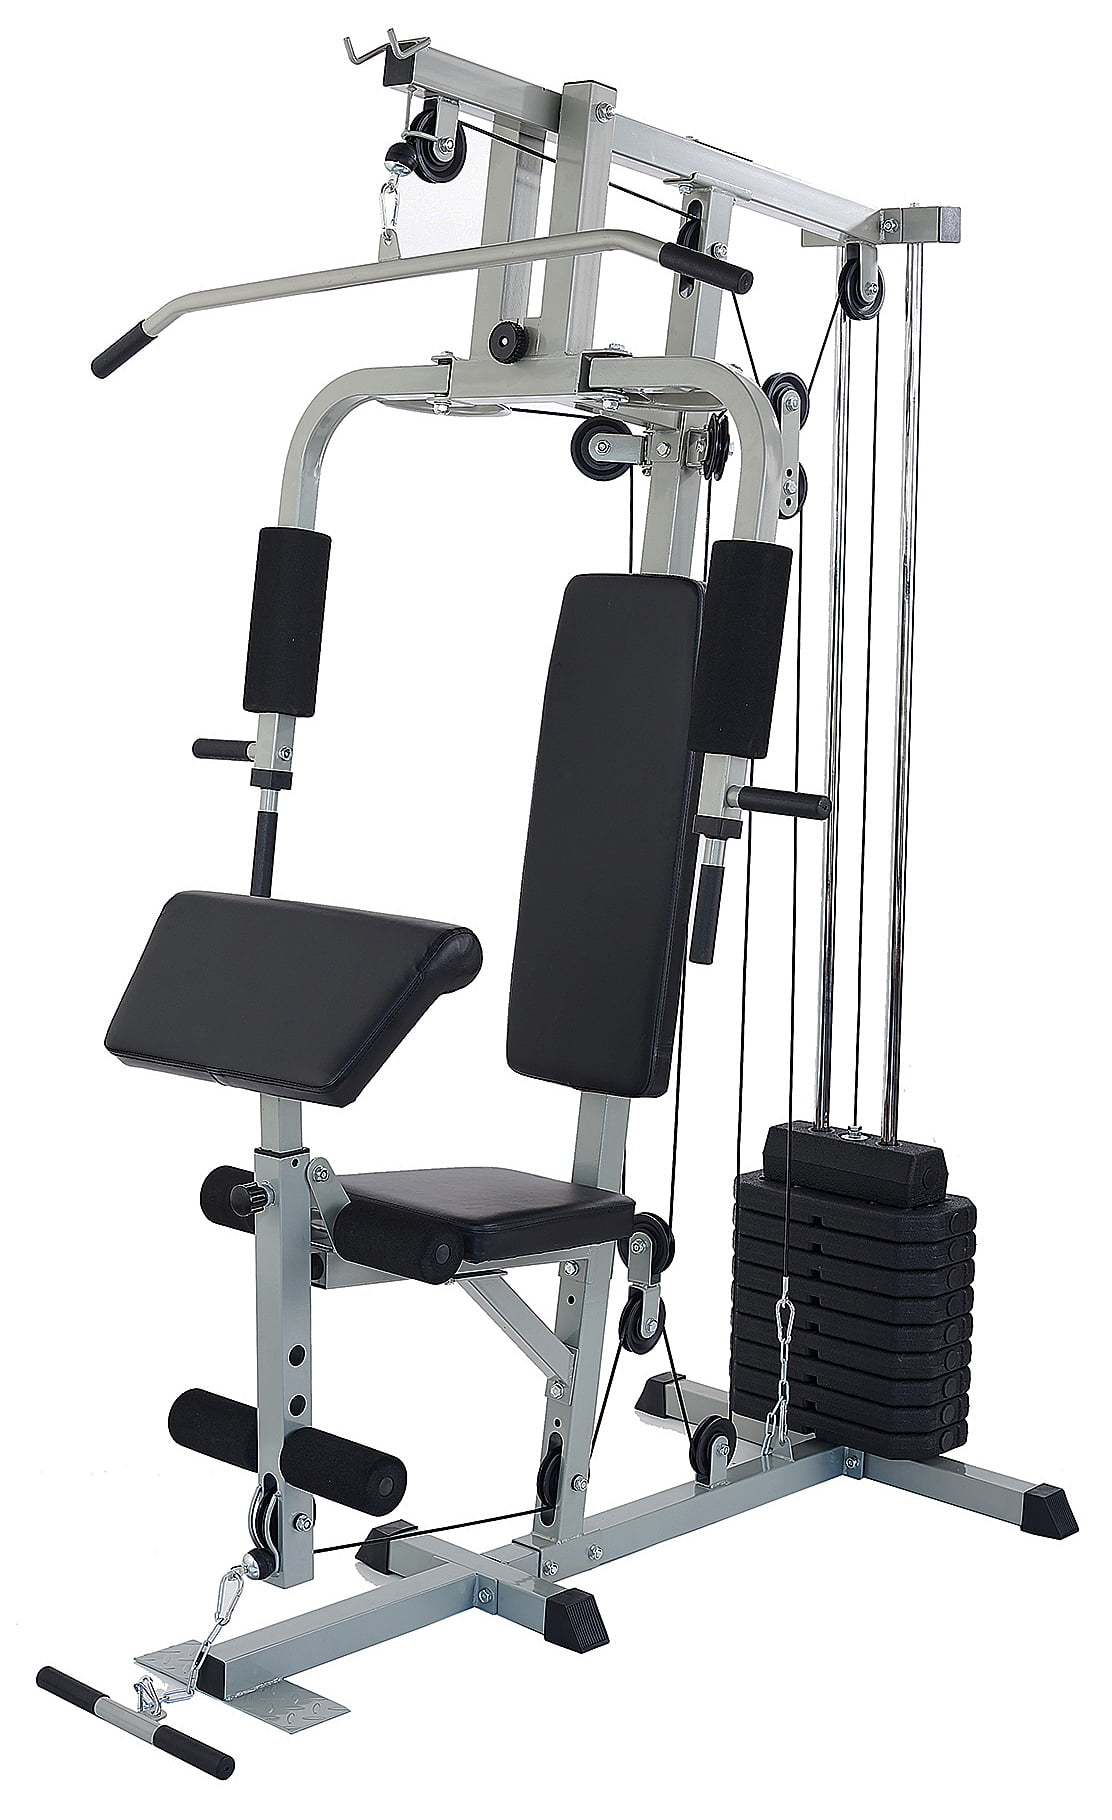 FITNESS STATION HOME MULTI GYM STRENGTH WEIGHT TRAINING MUSCLE BUILDING 